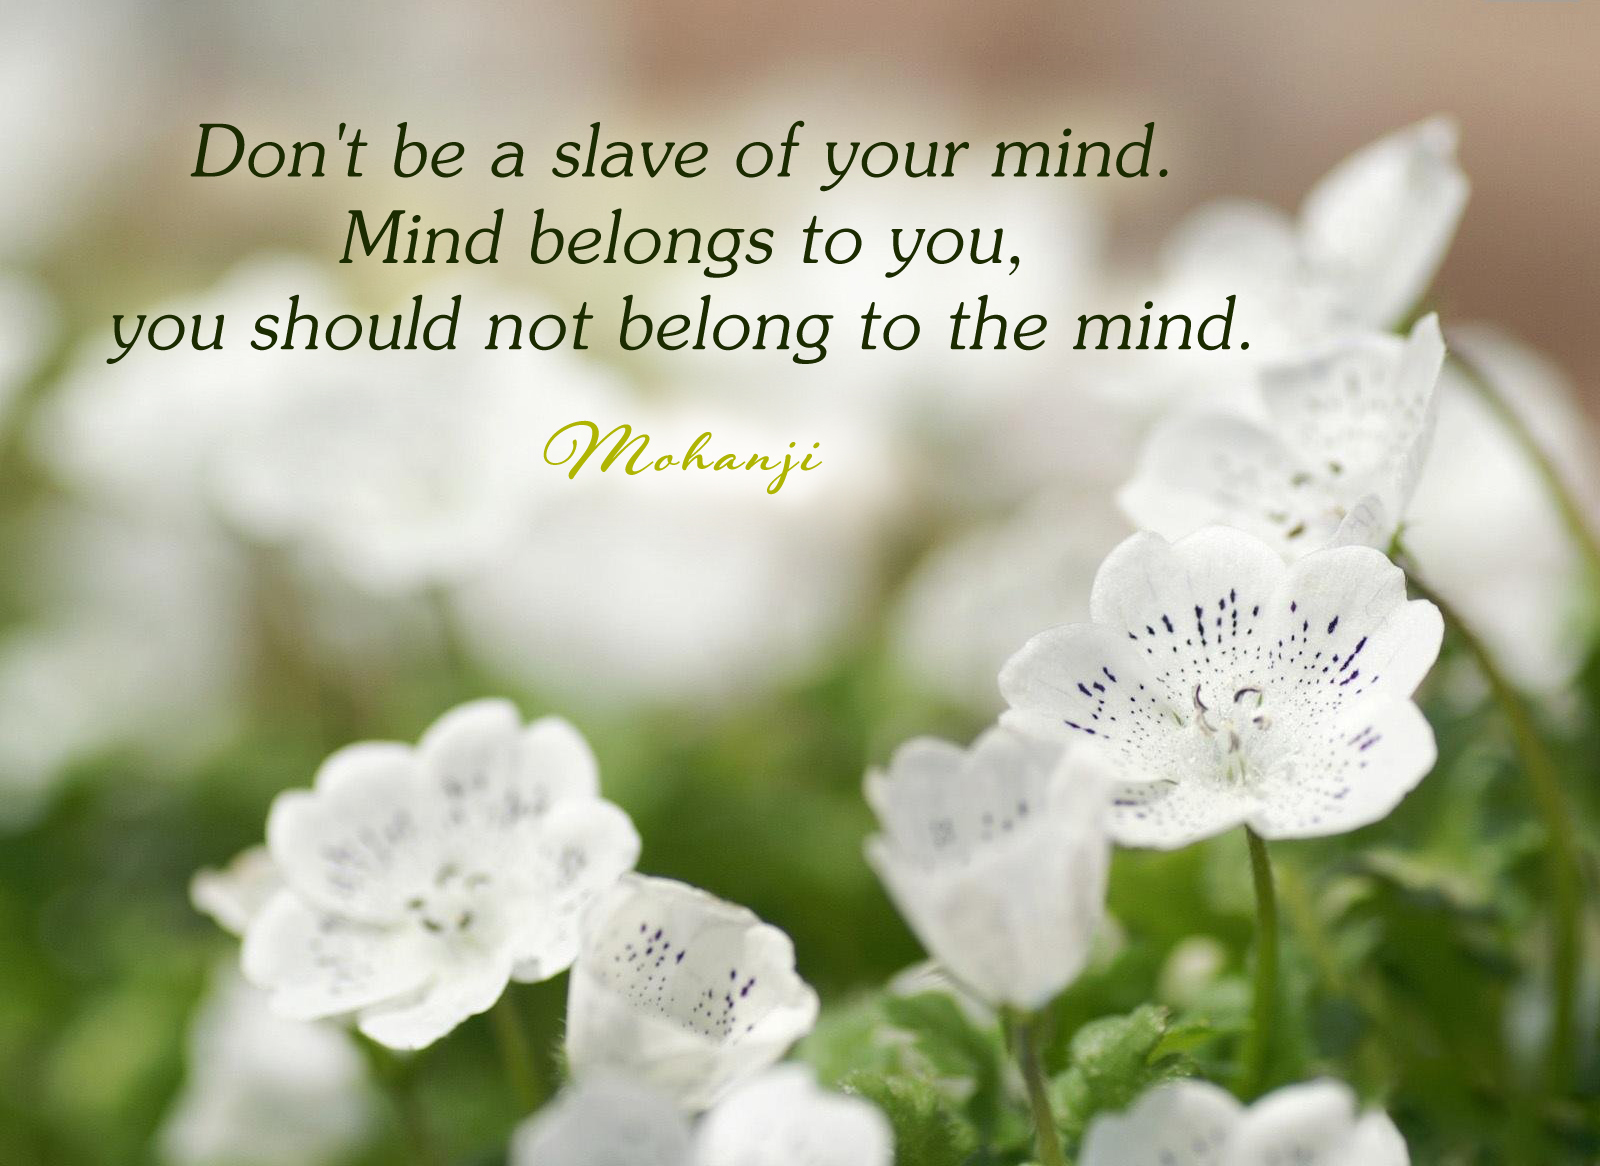 Mohanji quote - Do not be a slave of your mind